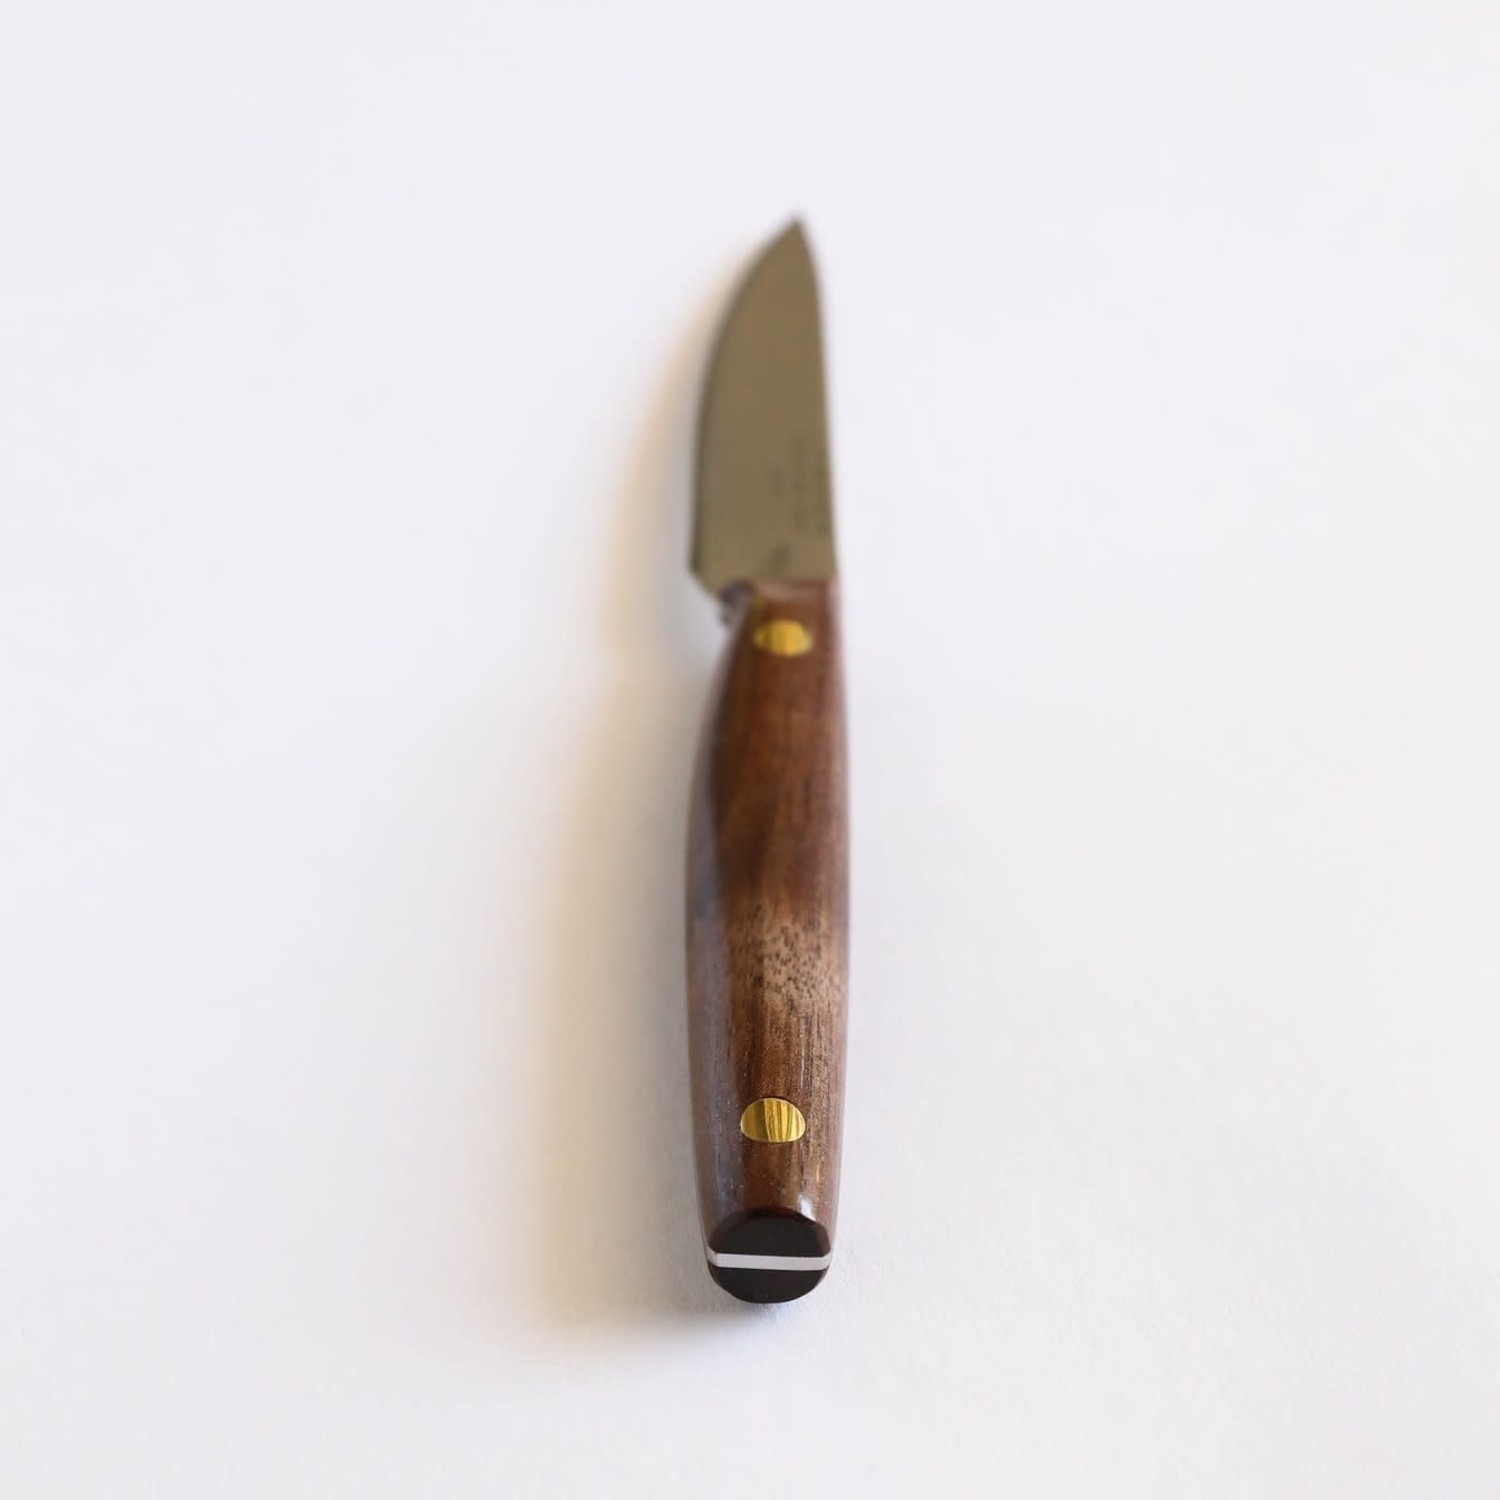 8 Vintage Chef's Knife with Walnut Handle - Lamson